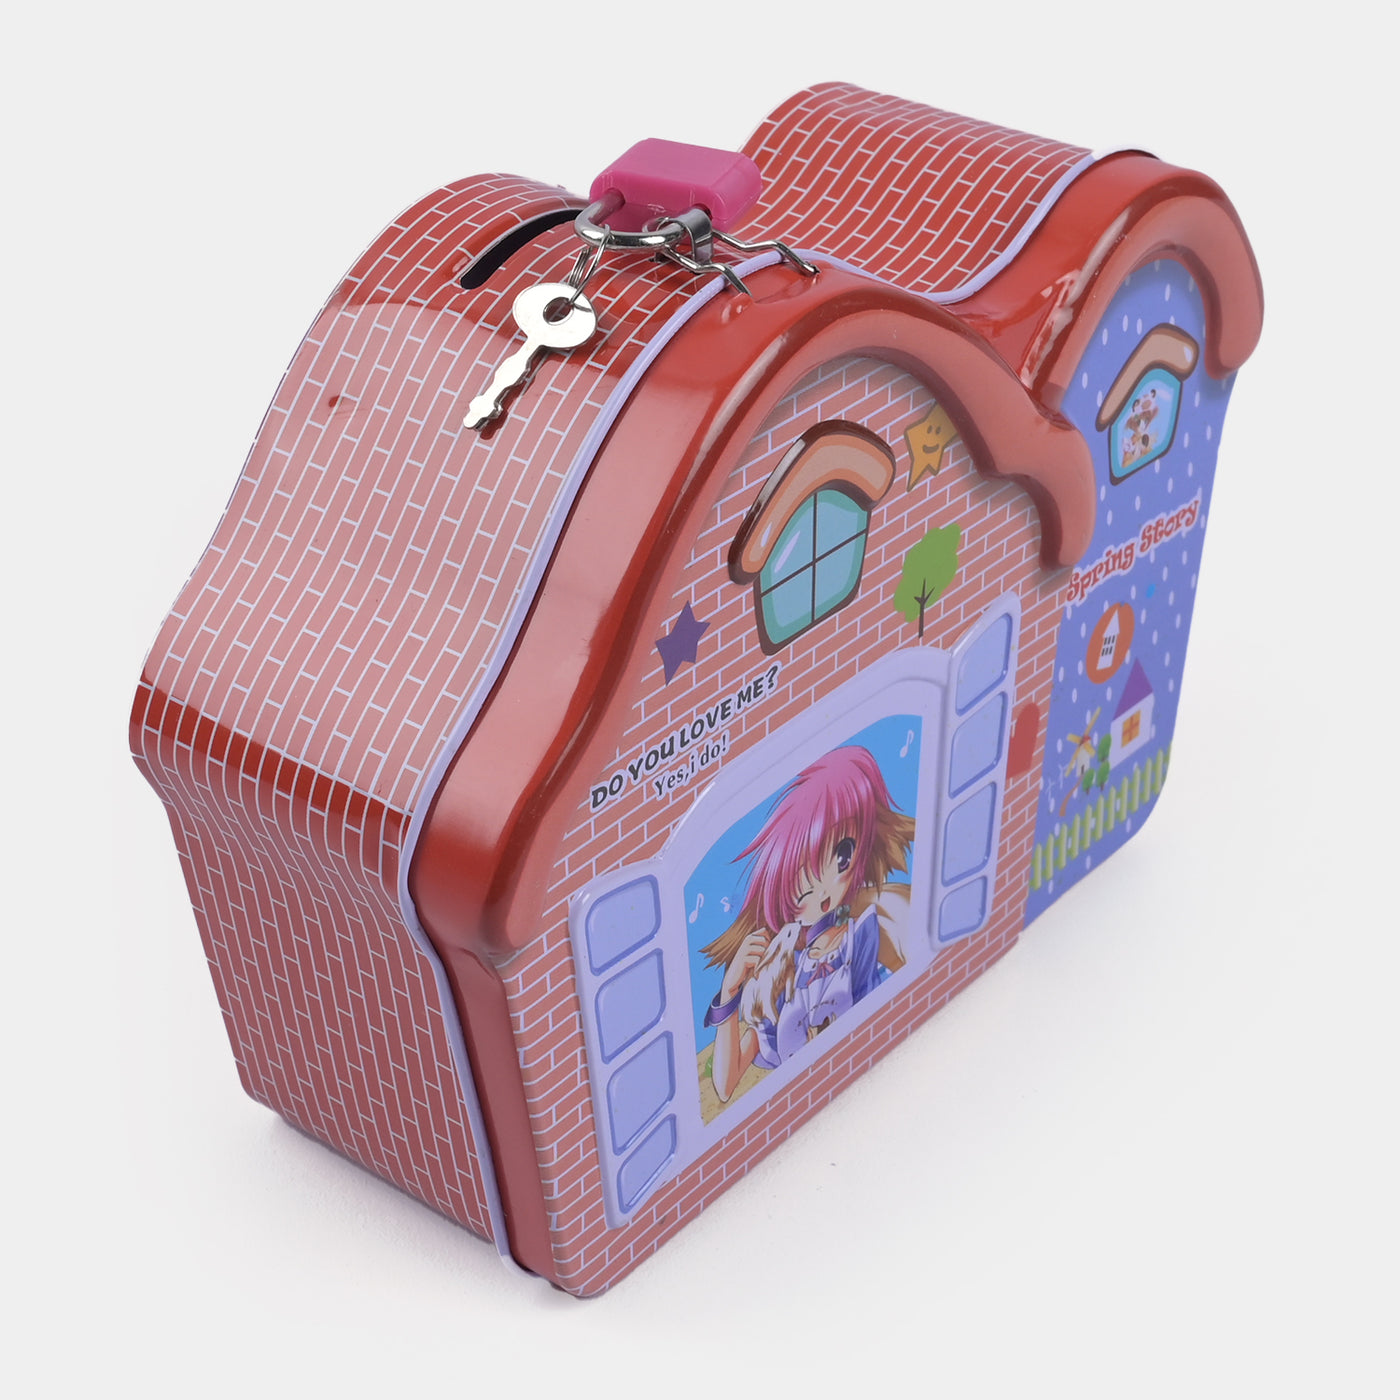 Metal Coin/Money With Lock Box For Kids